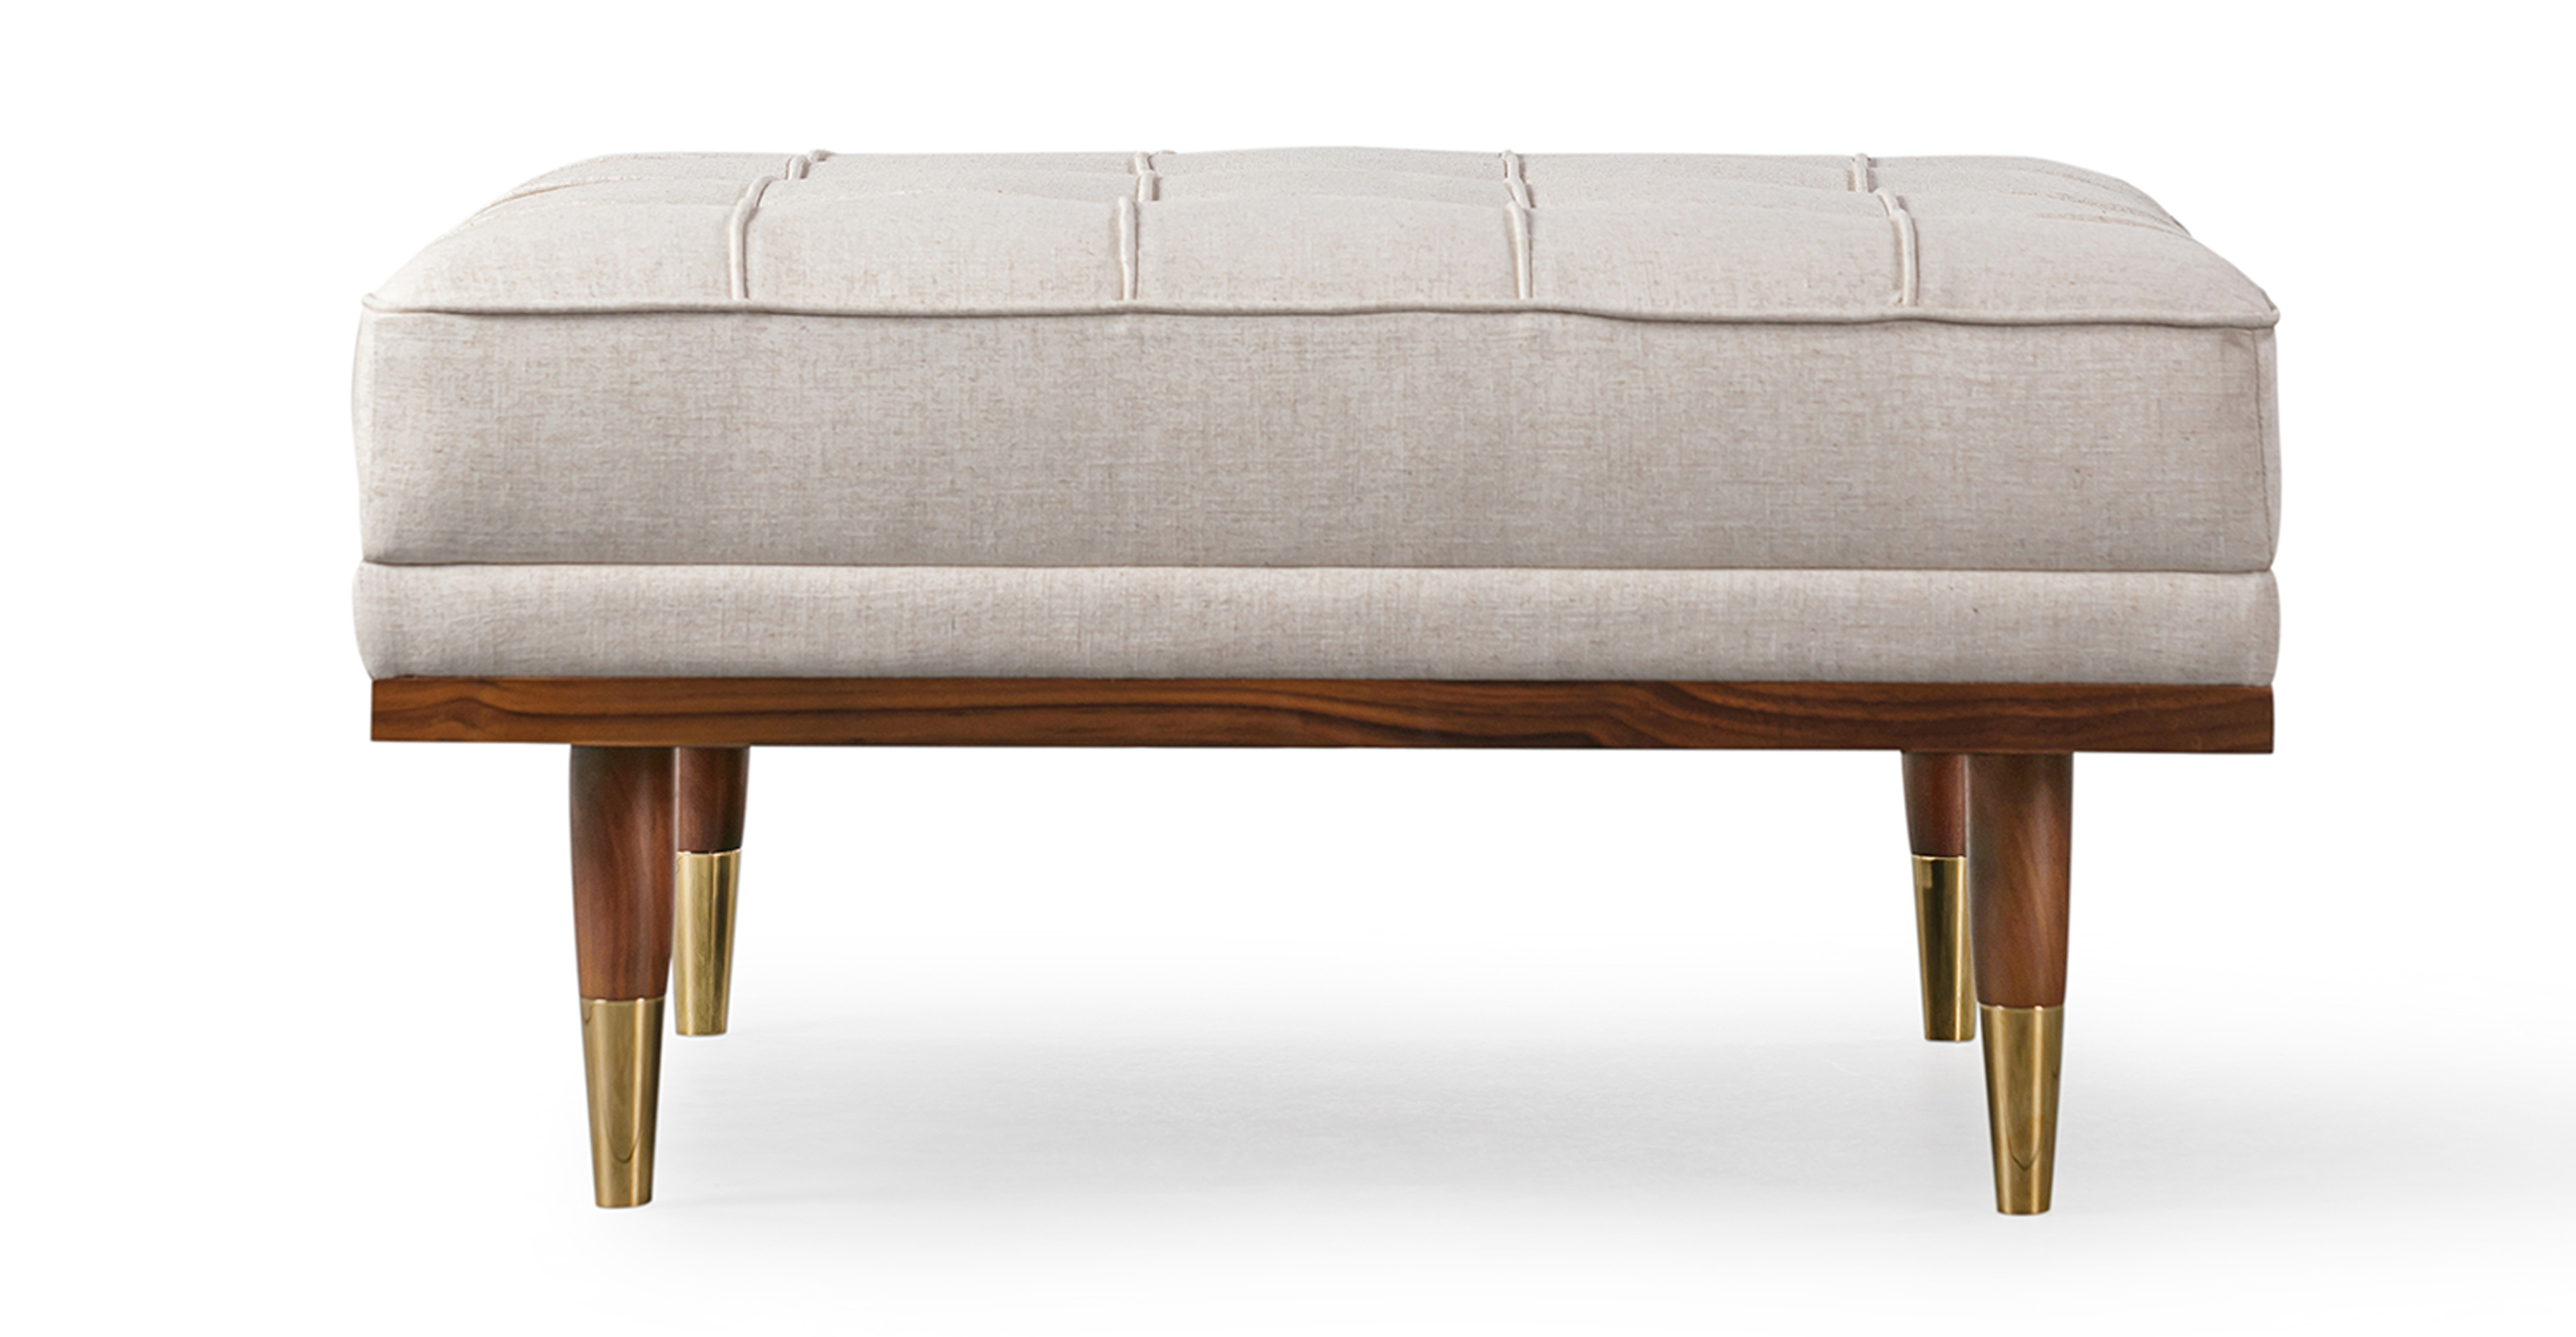 Image shows side picture of Mid-Century Modern Woodrow Box Ottoman in Viscose Woven Oatmeal Fabric. Frame and legs are walnut wood. Legs are brass tipped walnut wood. The cushion is button tufted. 